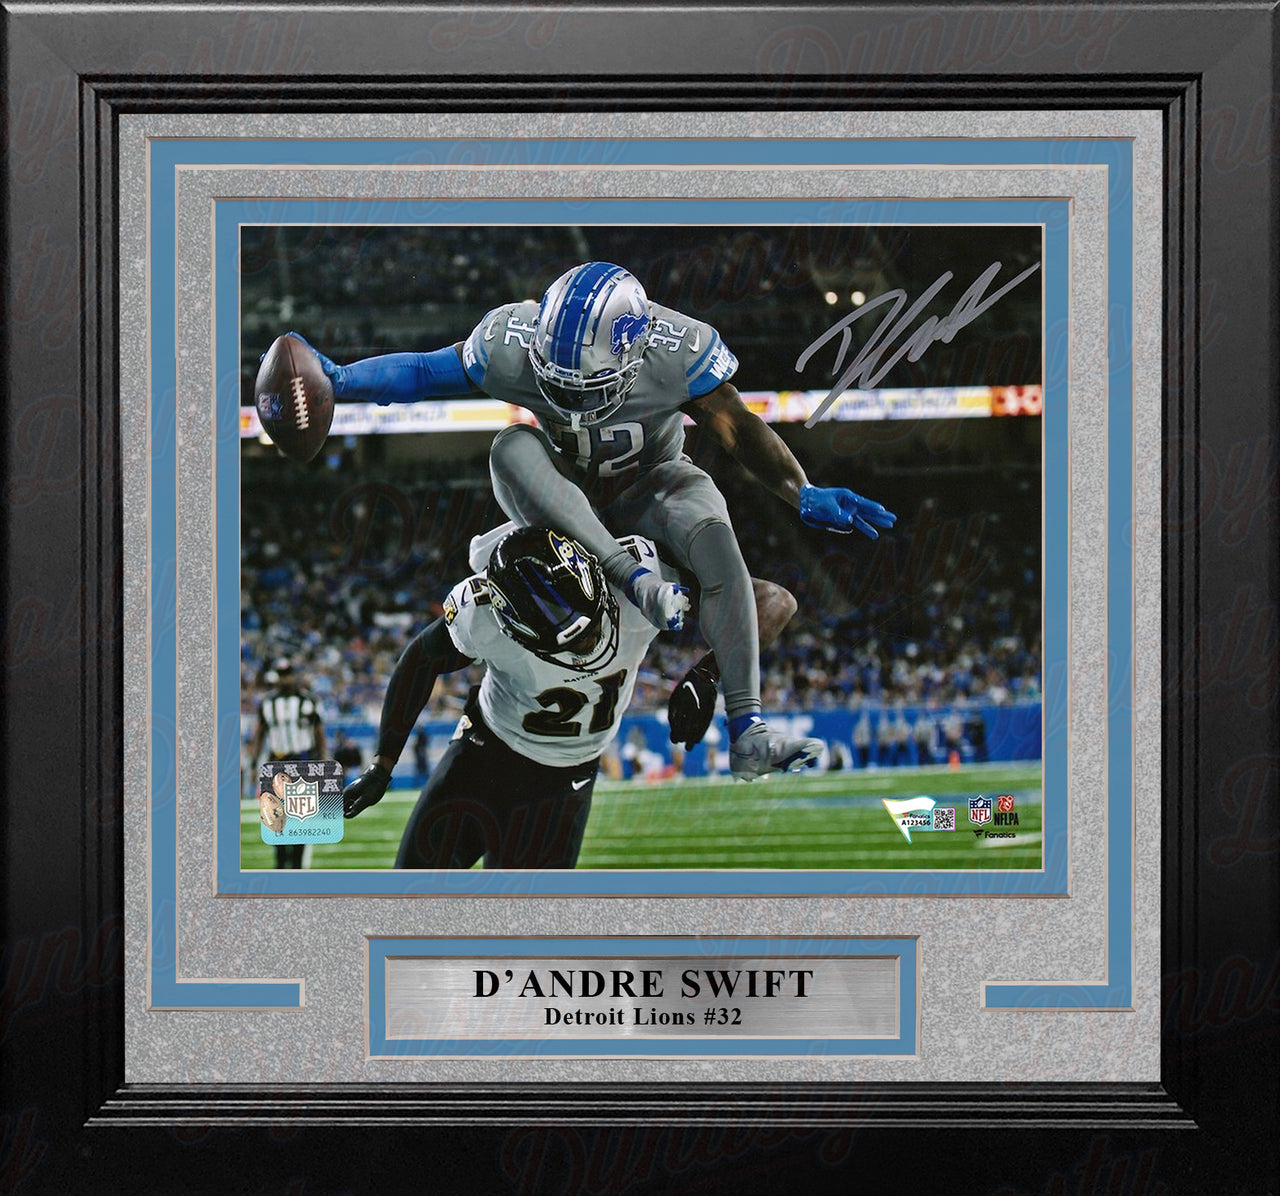 D'Andre Swift Hurdle Detroit Lions Autographed 8" x 10" Framed Football Photo - Dynasty Sports & Framing 